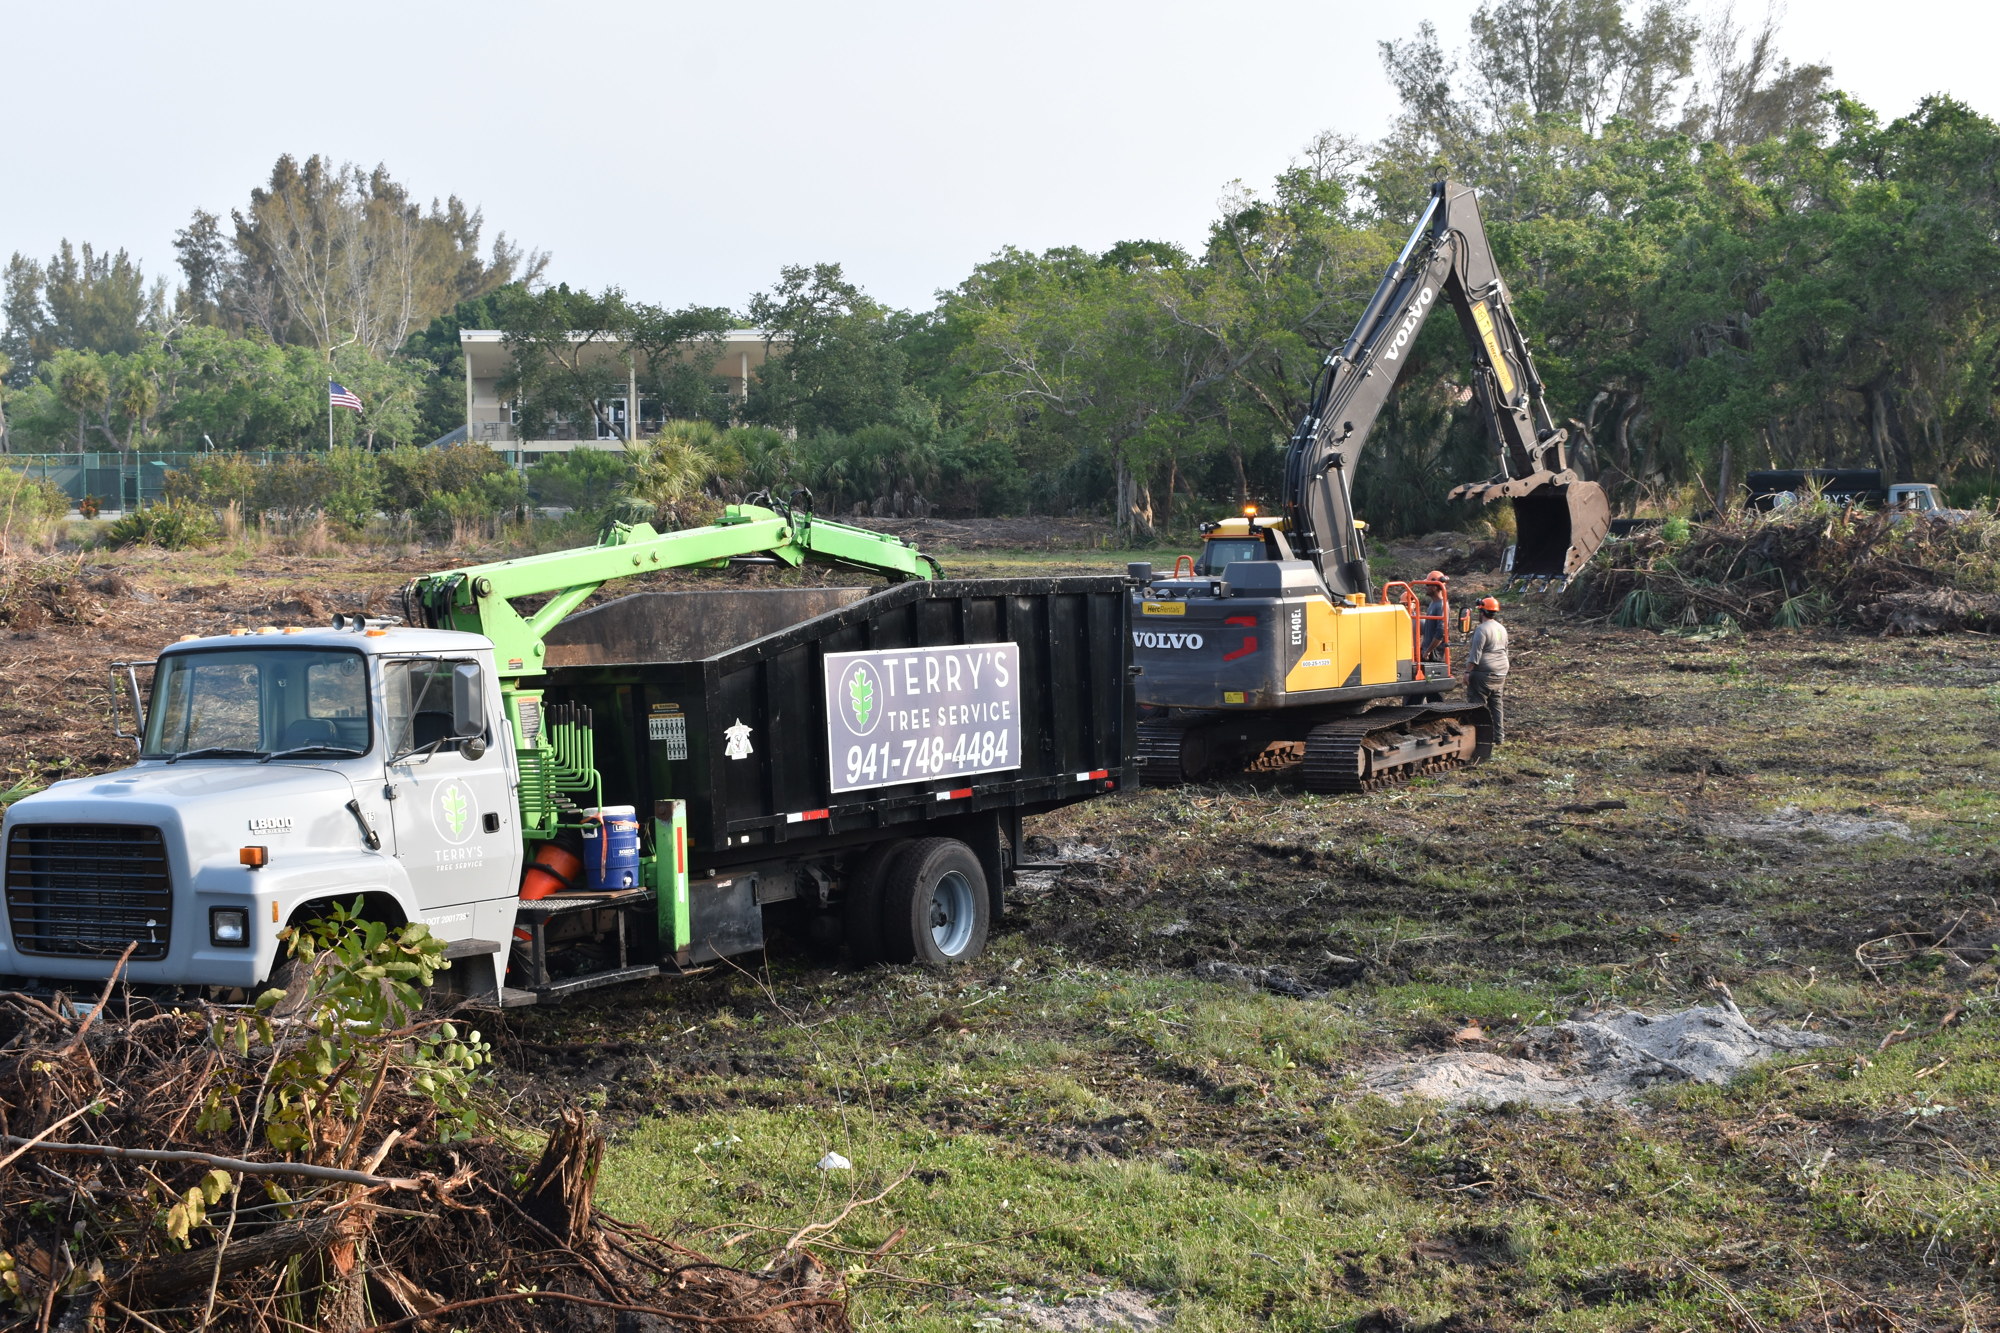 Crews from Terry’s Tree Service are already ahead of schedule, according to Longboat Key town projects manager Charlie Mopps.